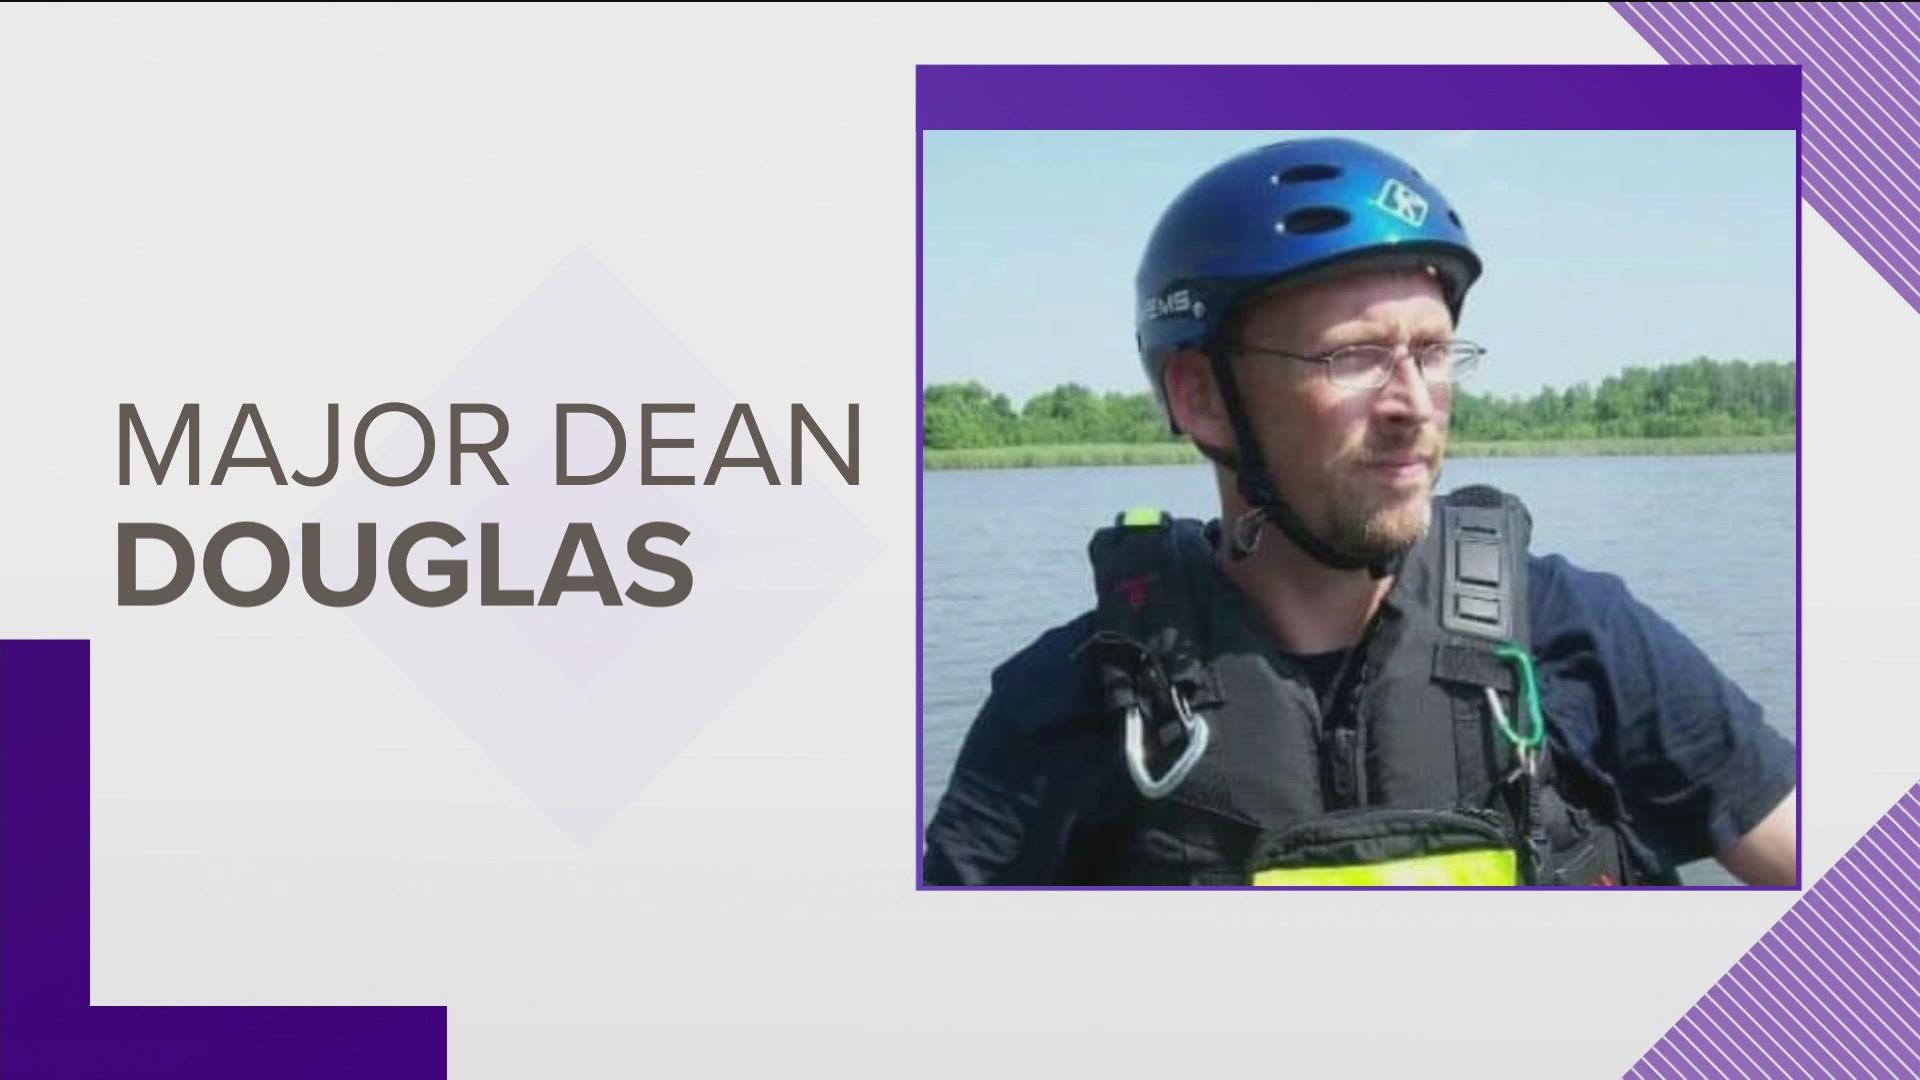 Major Dean Douglas was injured while responding to a call during last week's Little Rock Marathon. He died on Friday.